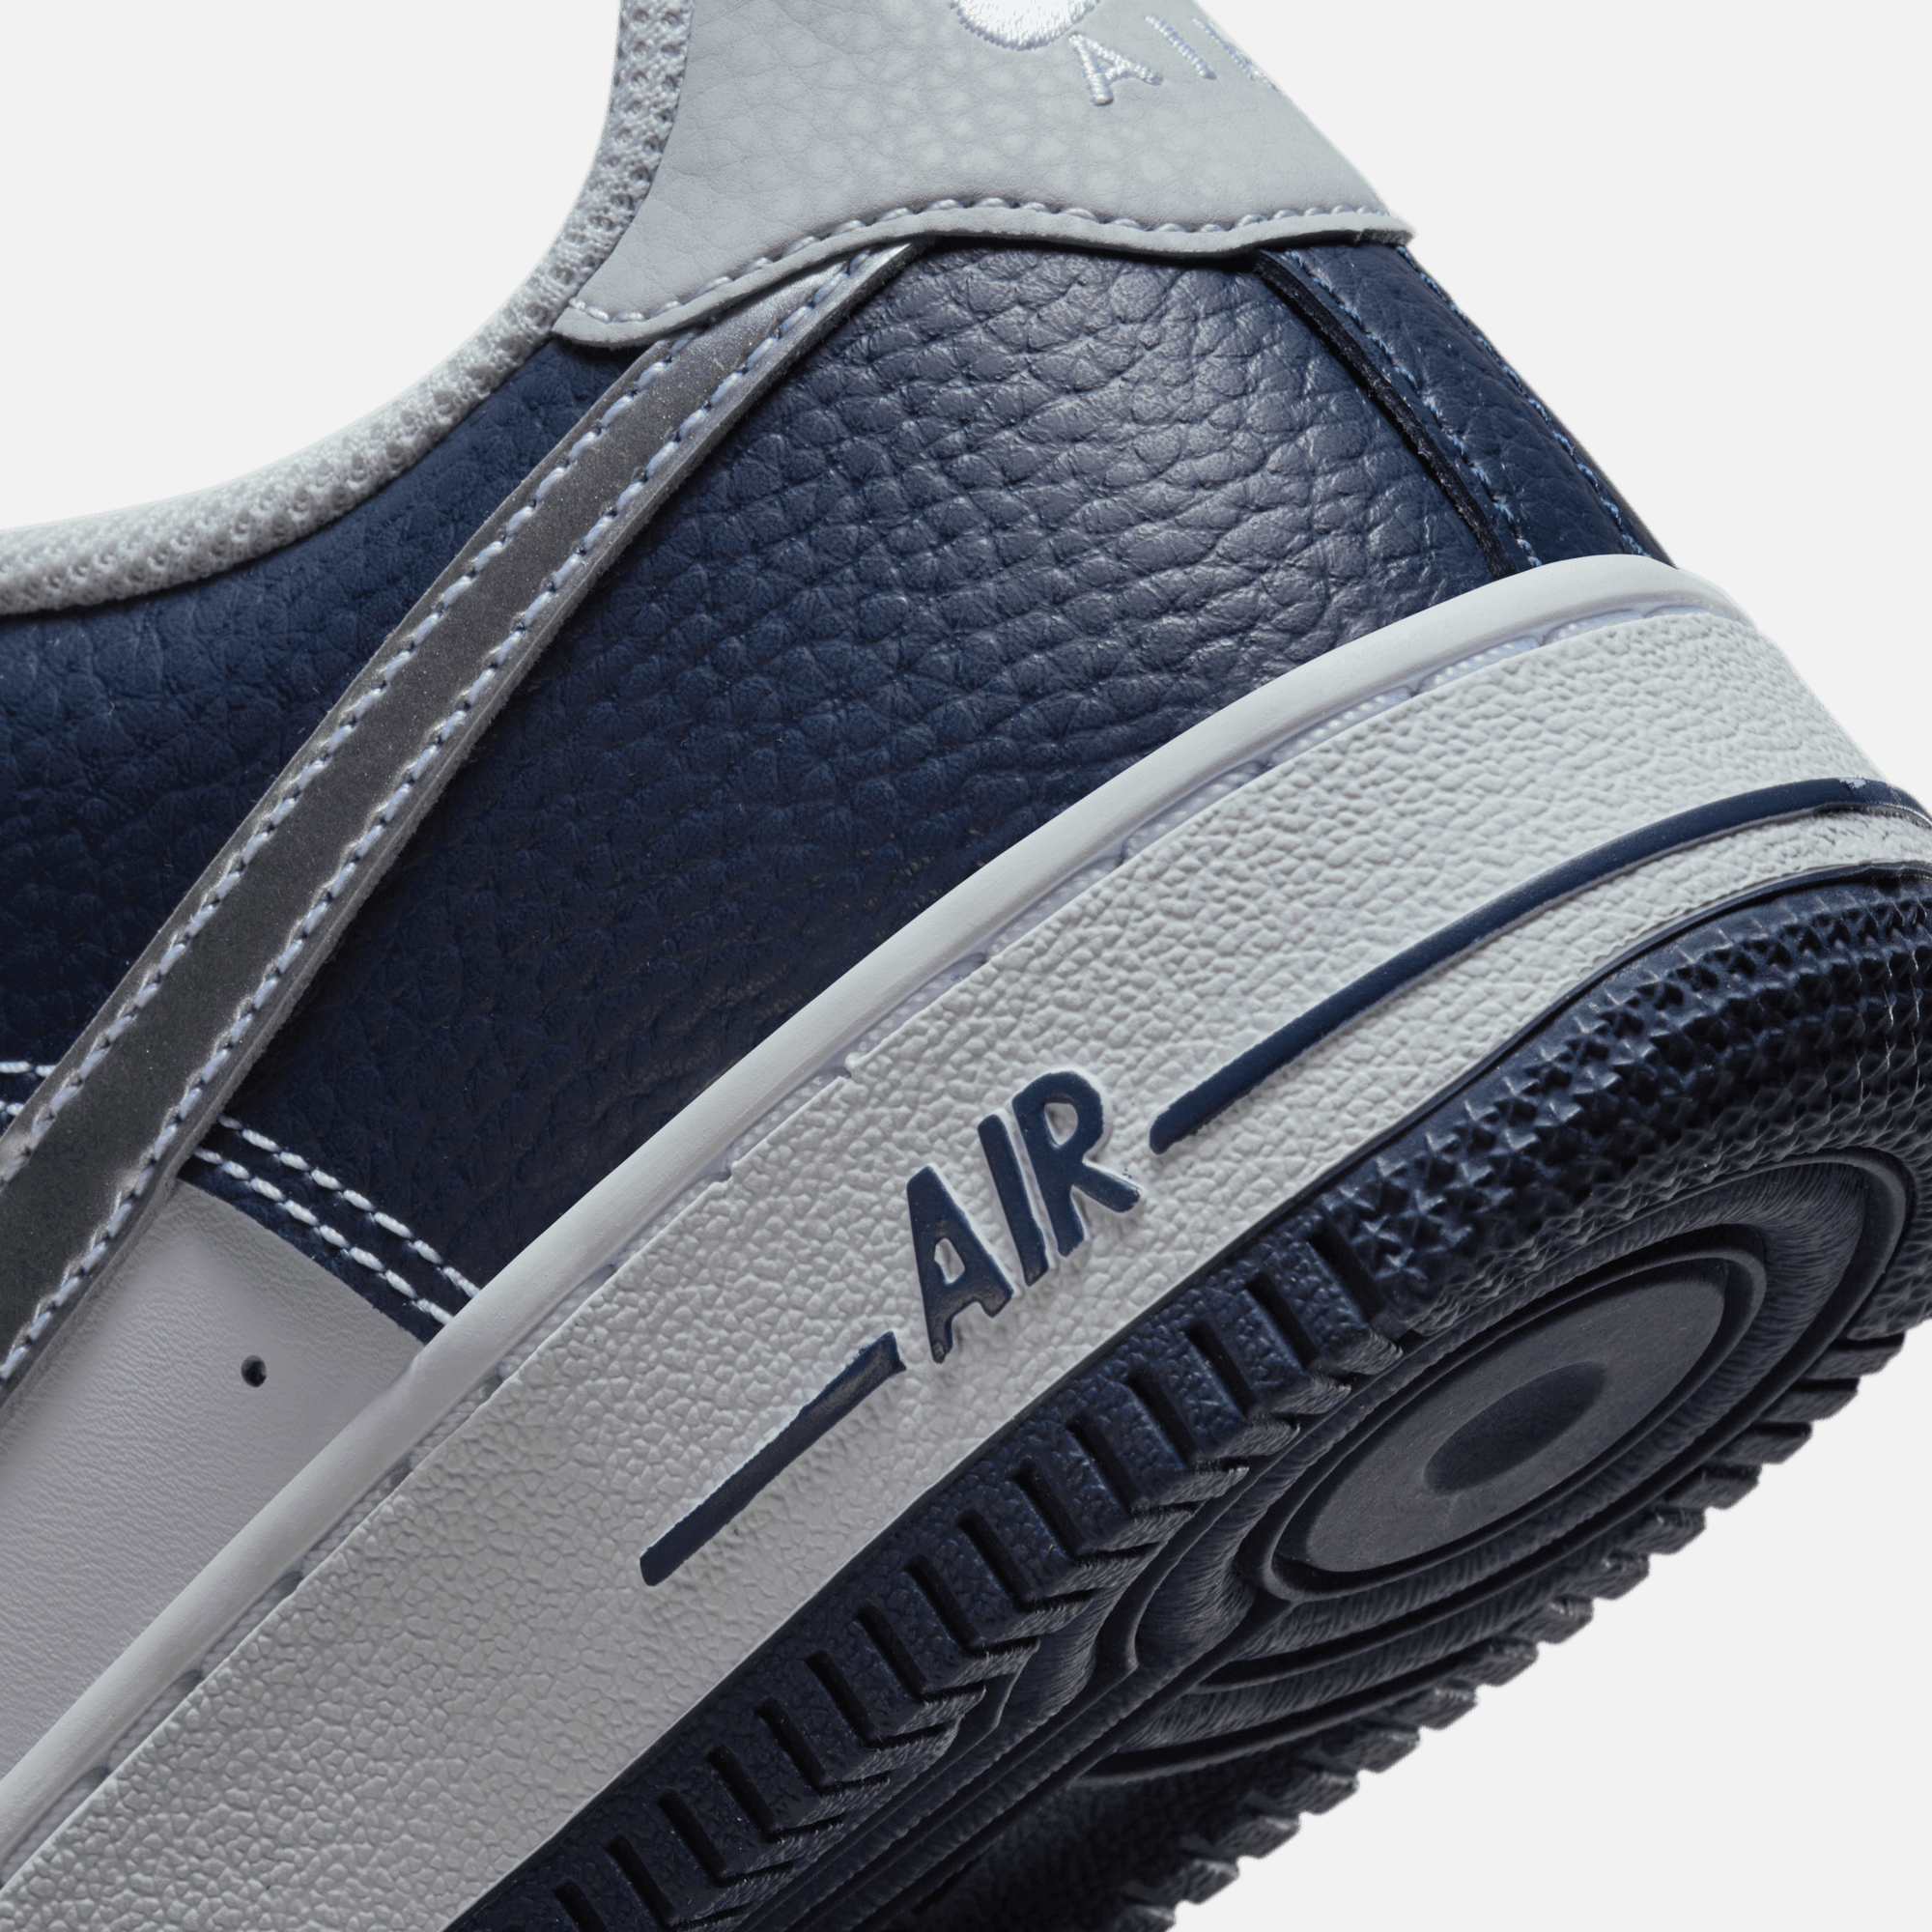 Nike Air Force 1 Low (GS) White/Navy